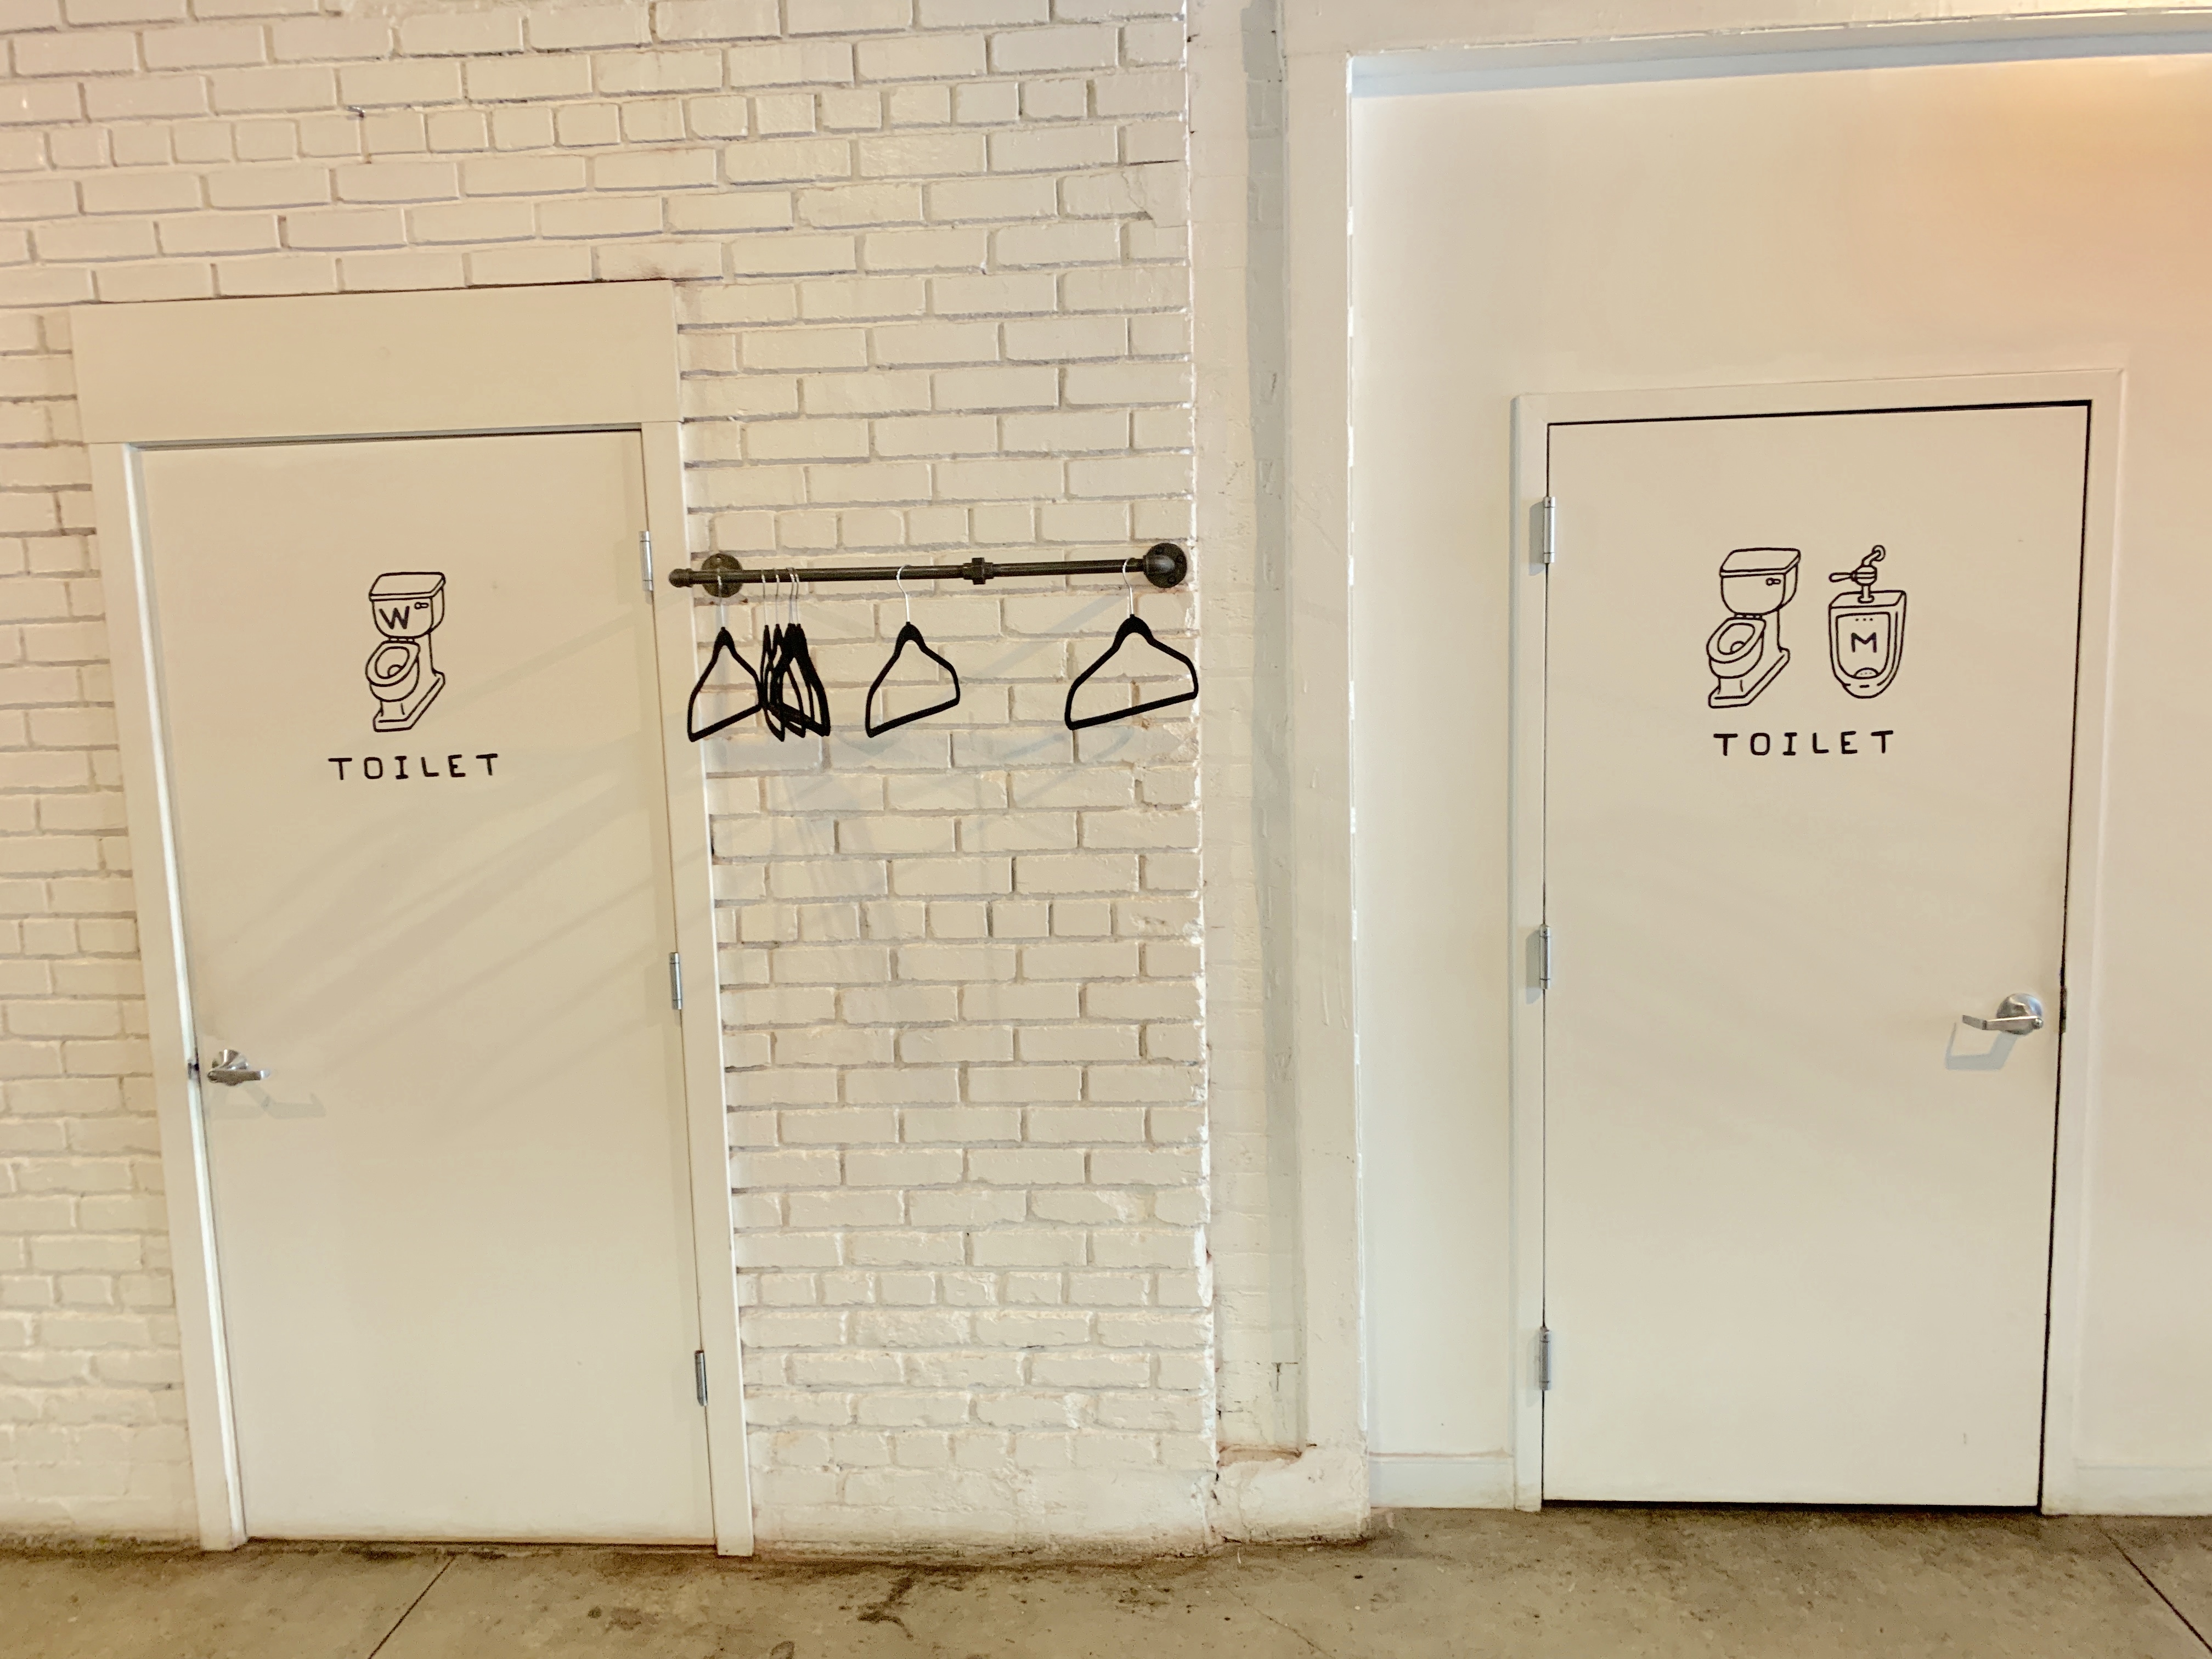 the after picture of the bathrooms at good company in cleveland, ohio, with M and W labels added to the toilet illustrations on each door